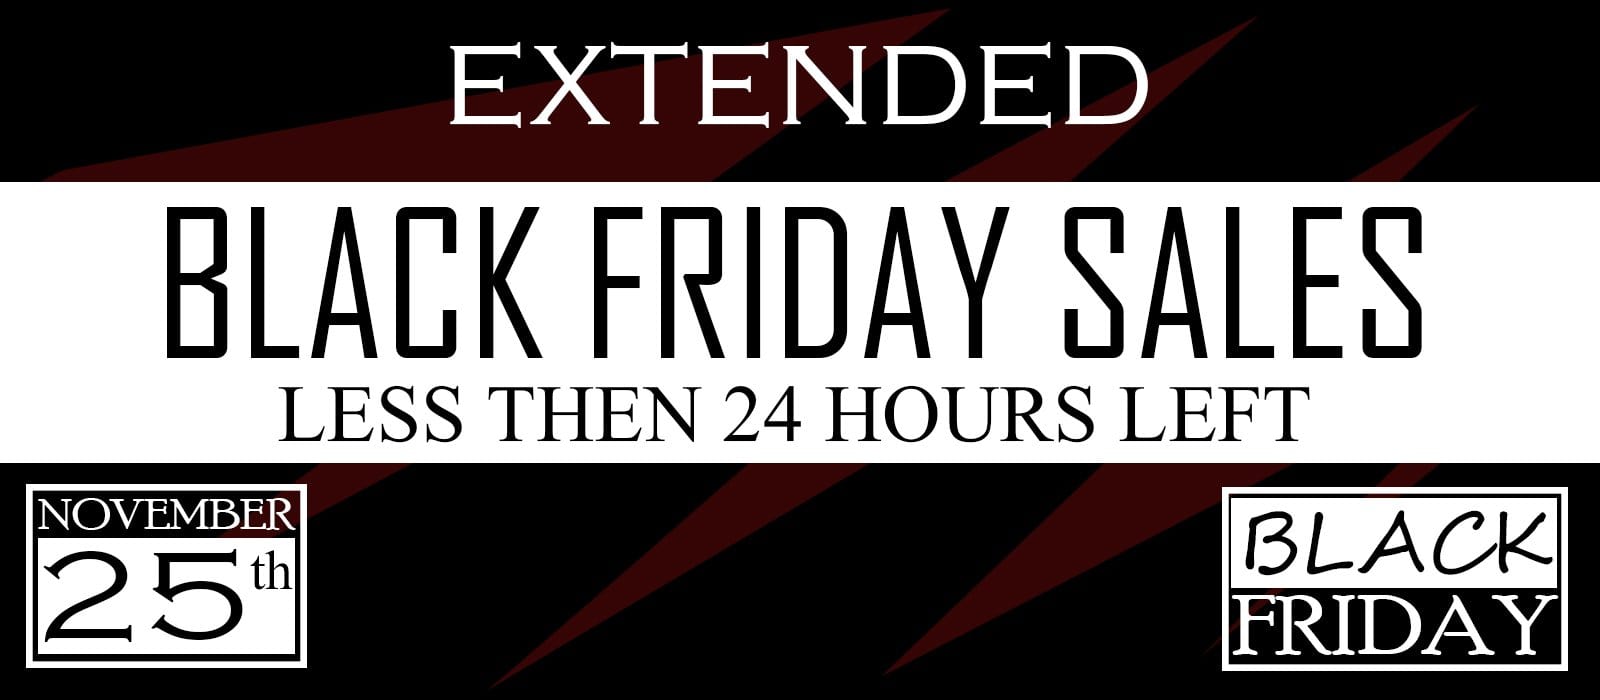 Black Friday Sale Is Extended - One More Day